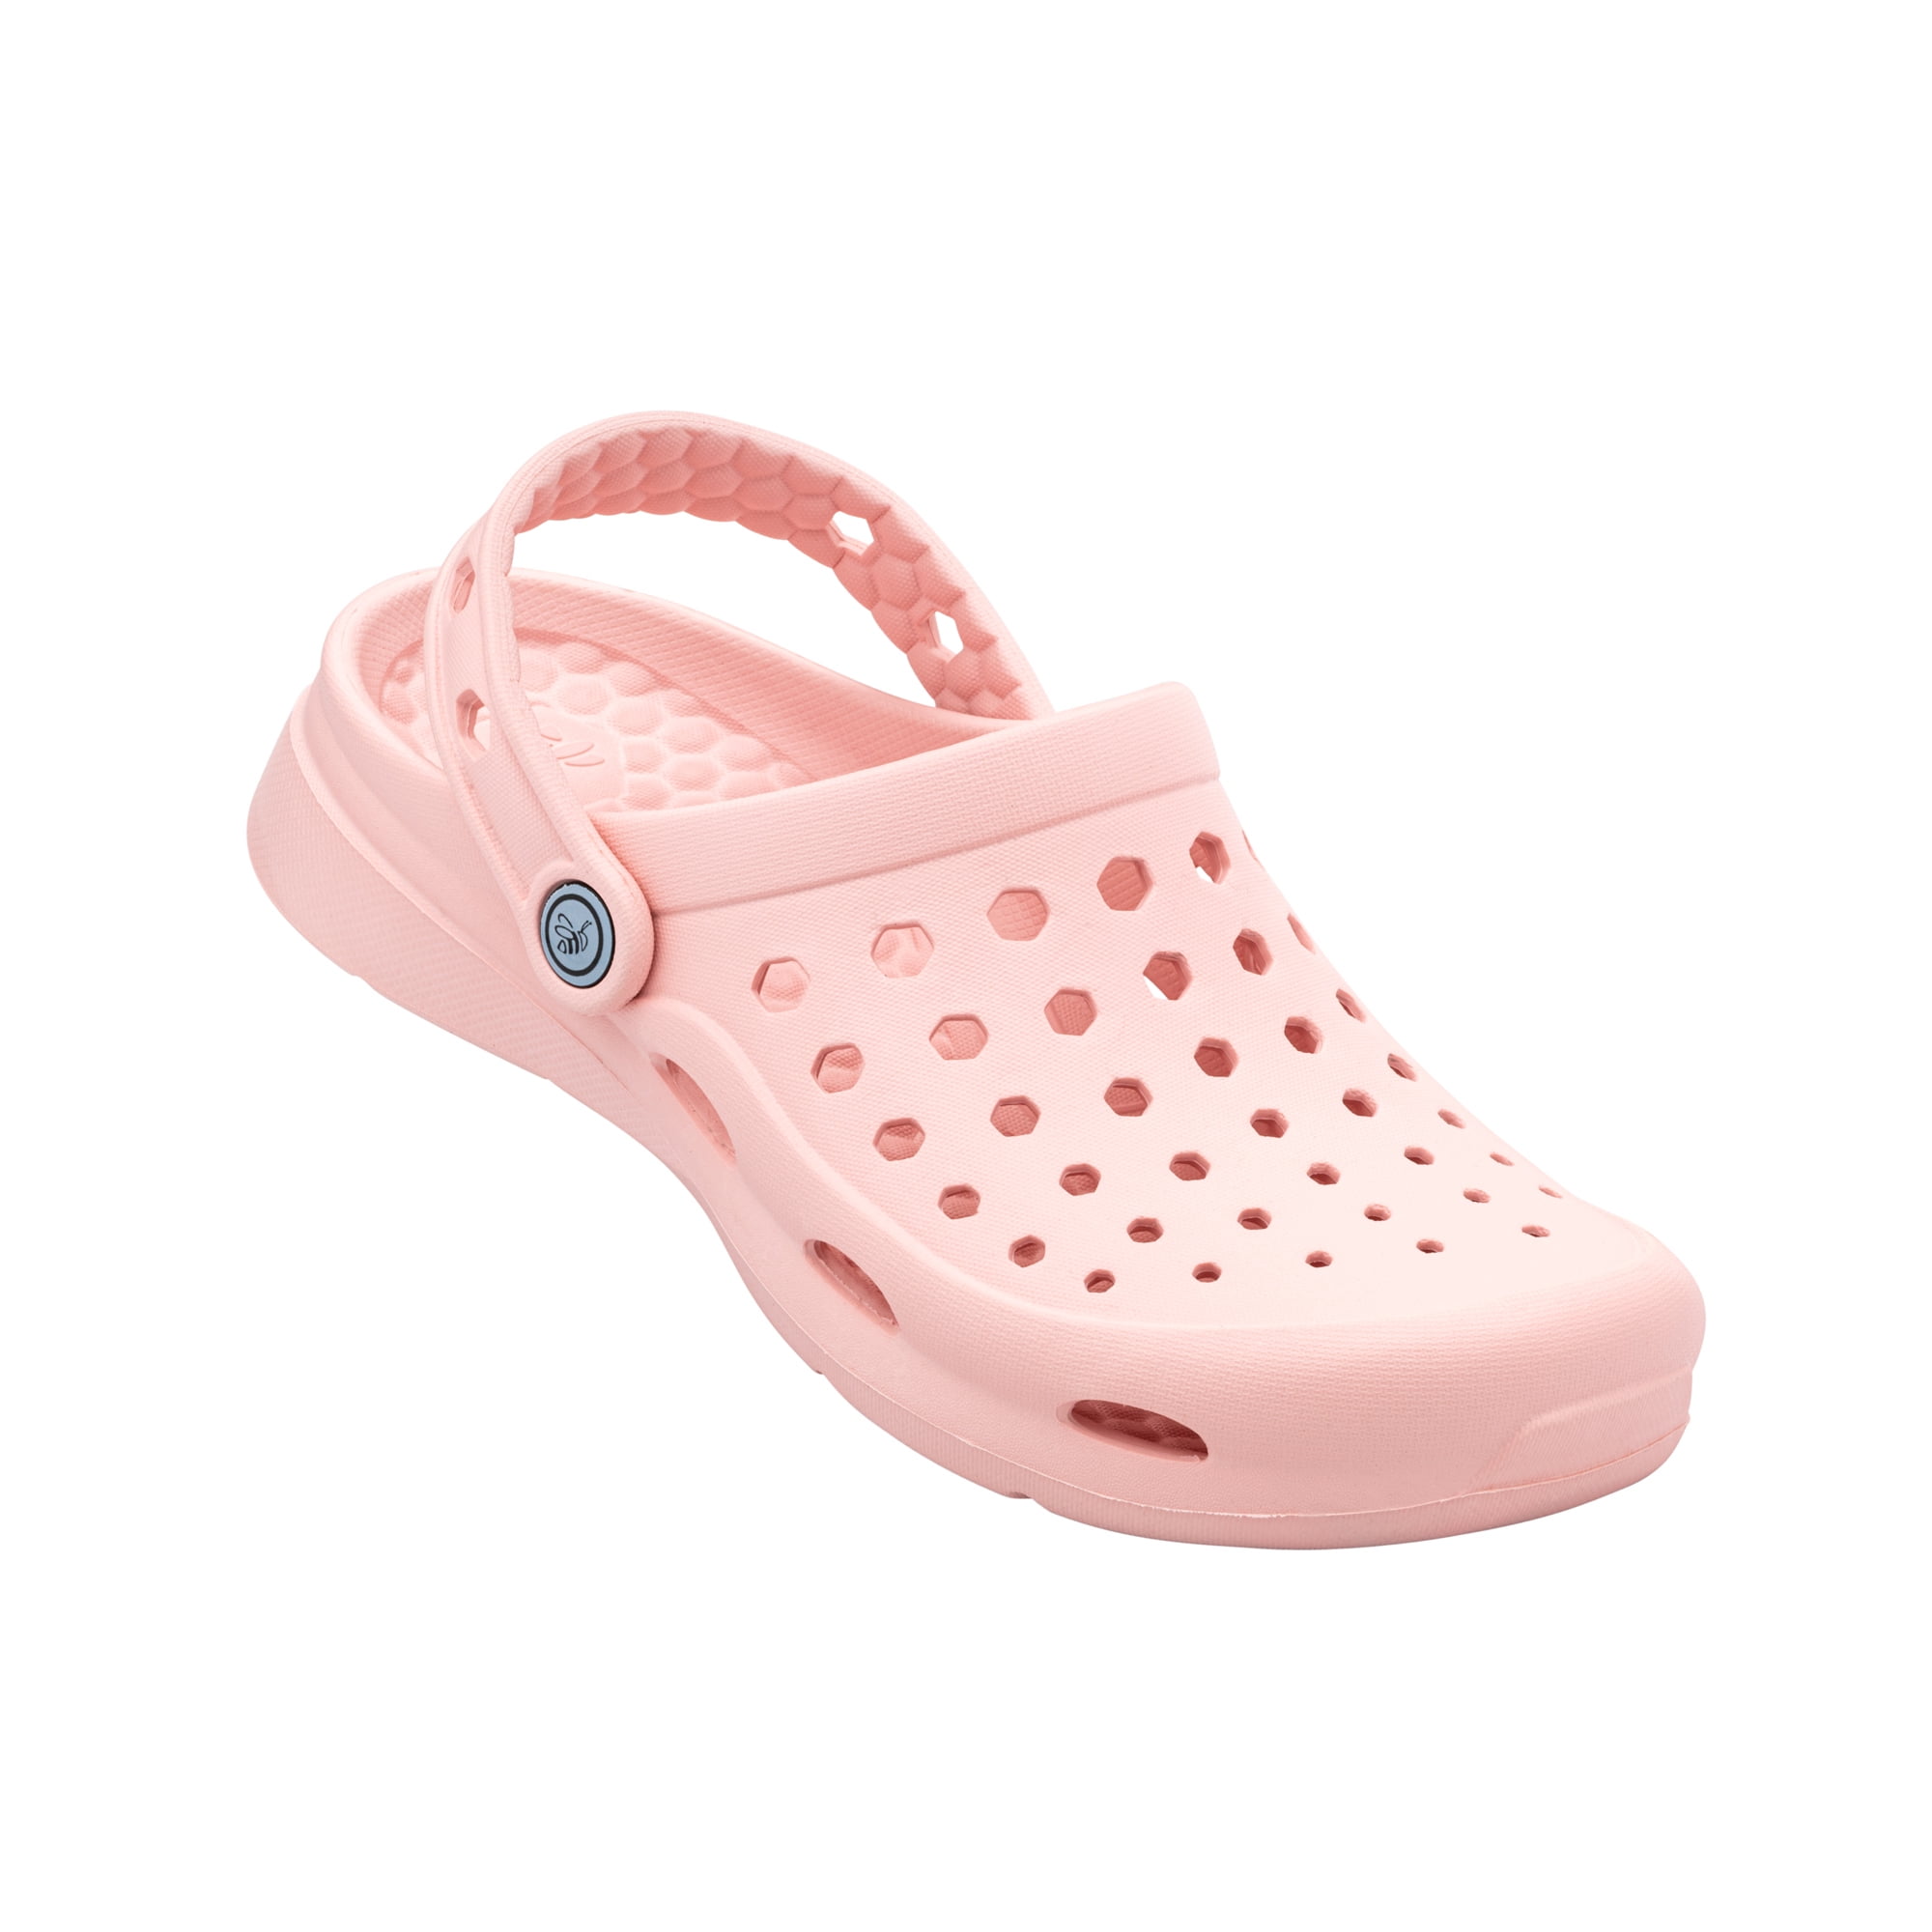 Joybees Active Clog Adult for Women and Men - Walking Supportive Clog ...